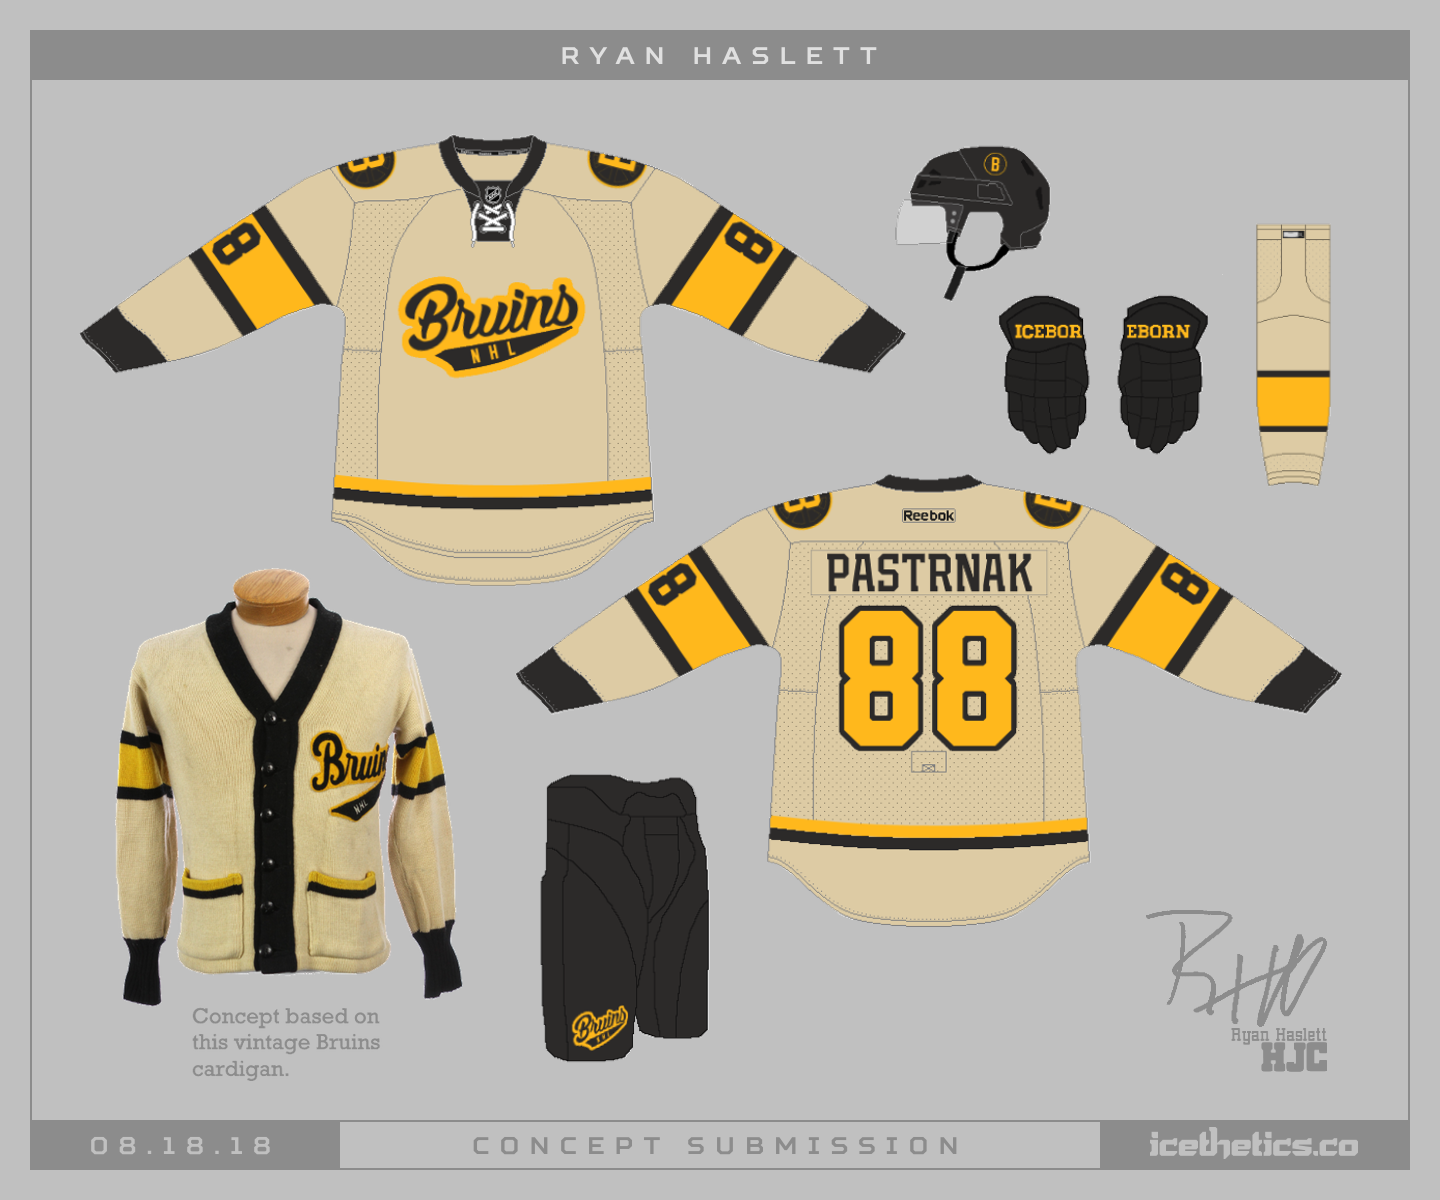 Bruins GM - Concept design for a new 3rd jersey. Yikes! The